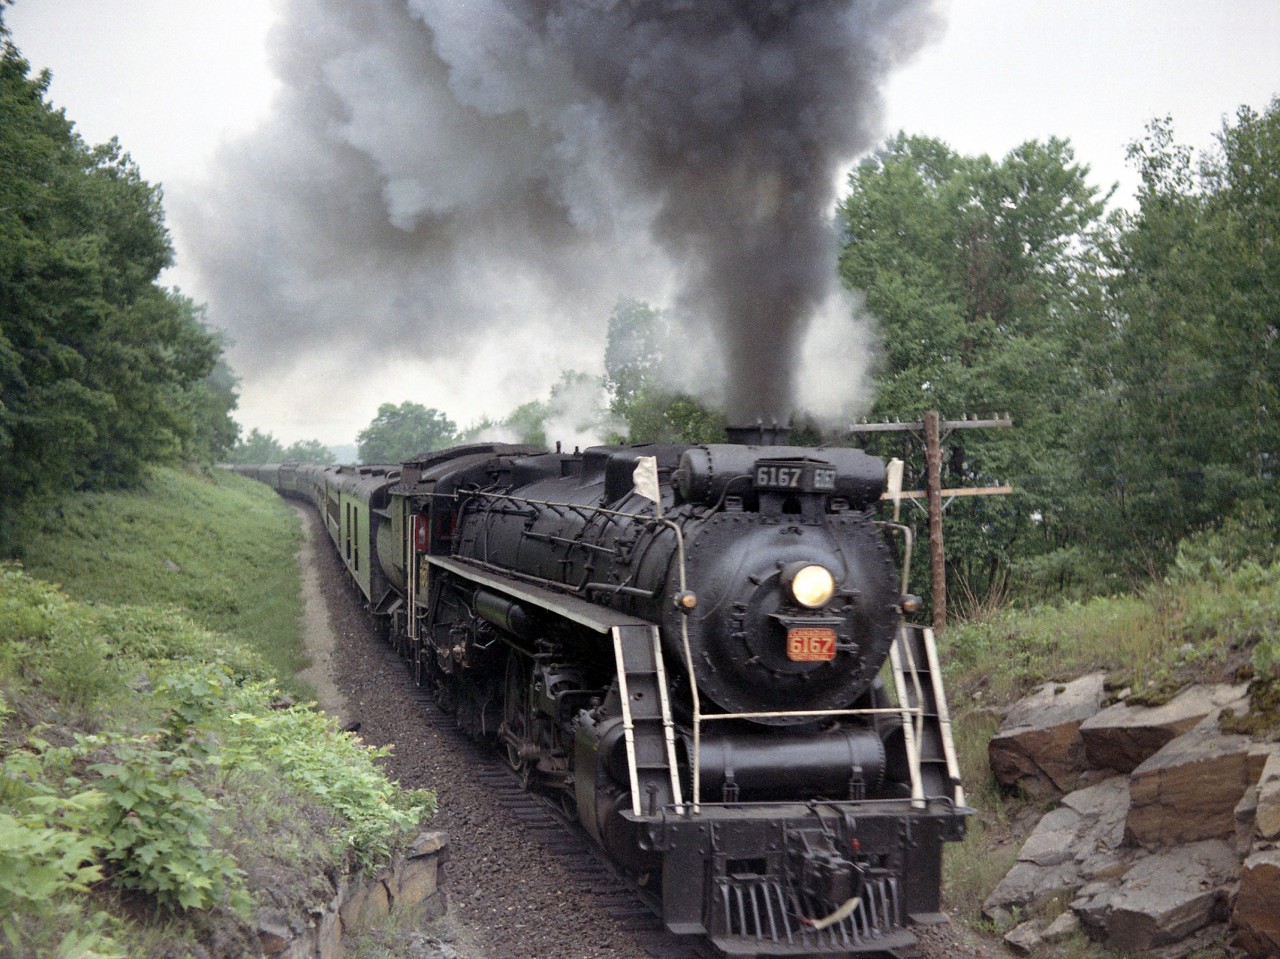 Flying white flags and showing off a good head of steam, CN U2e Northern 6167 snakes through the rocks of Muskoka near Bracebridge, operating on a fantrip in 1963.

(Note, geotagged location not exact).